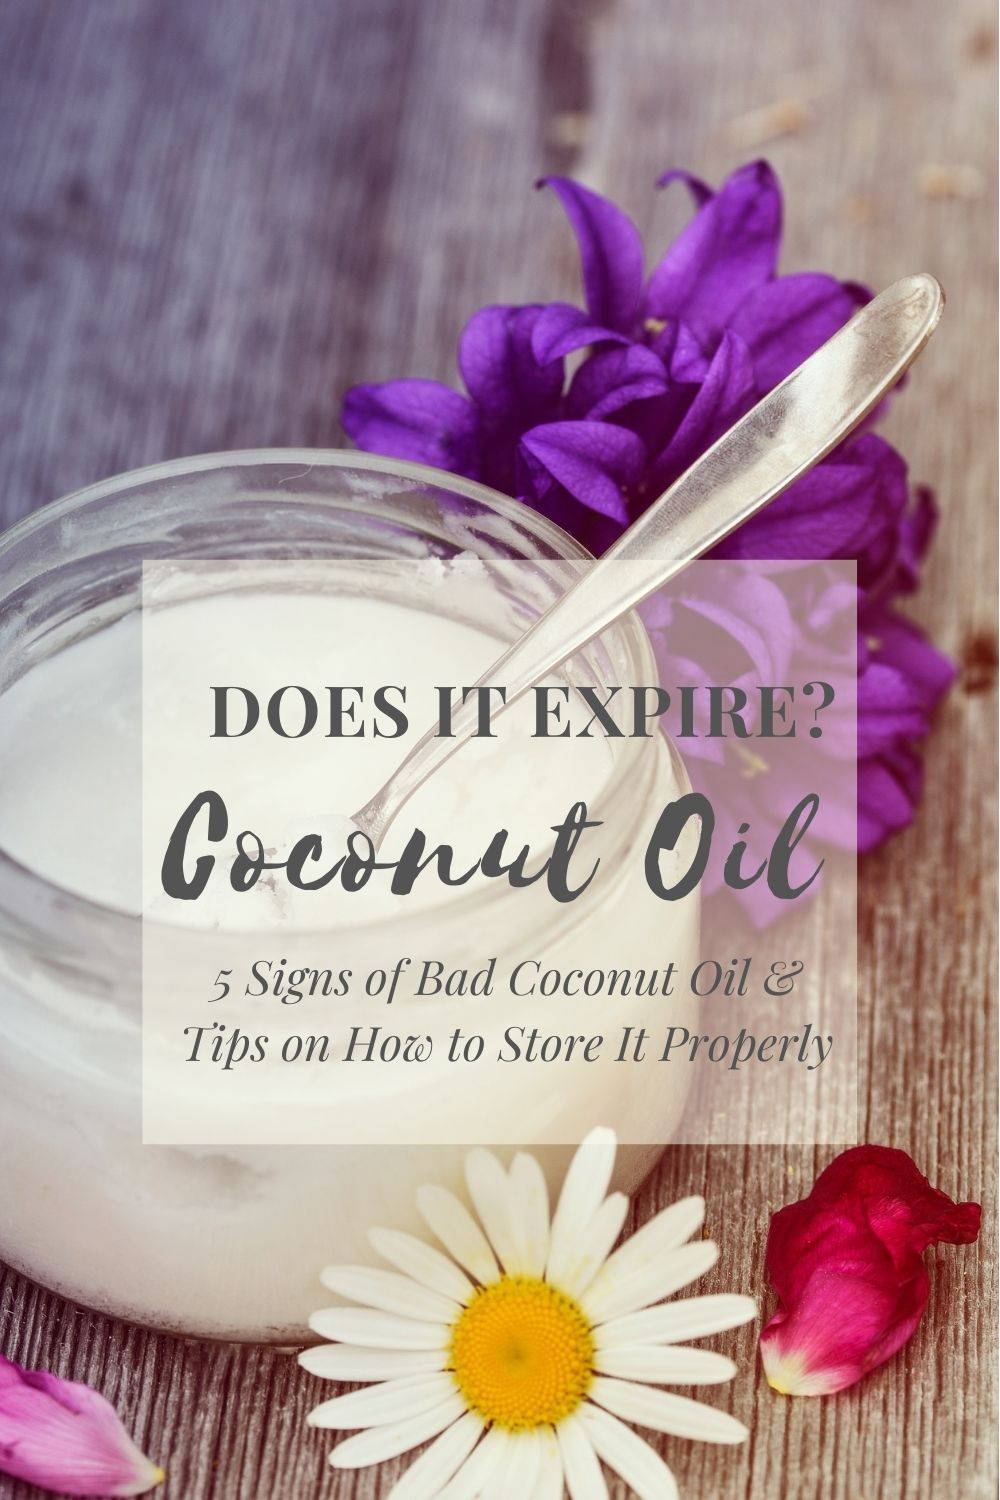 Does Coconut Oil Expire? 5 Signs of Bad Coconut Oil